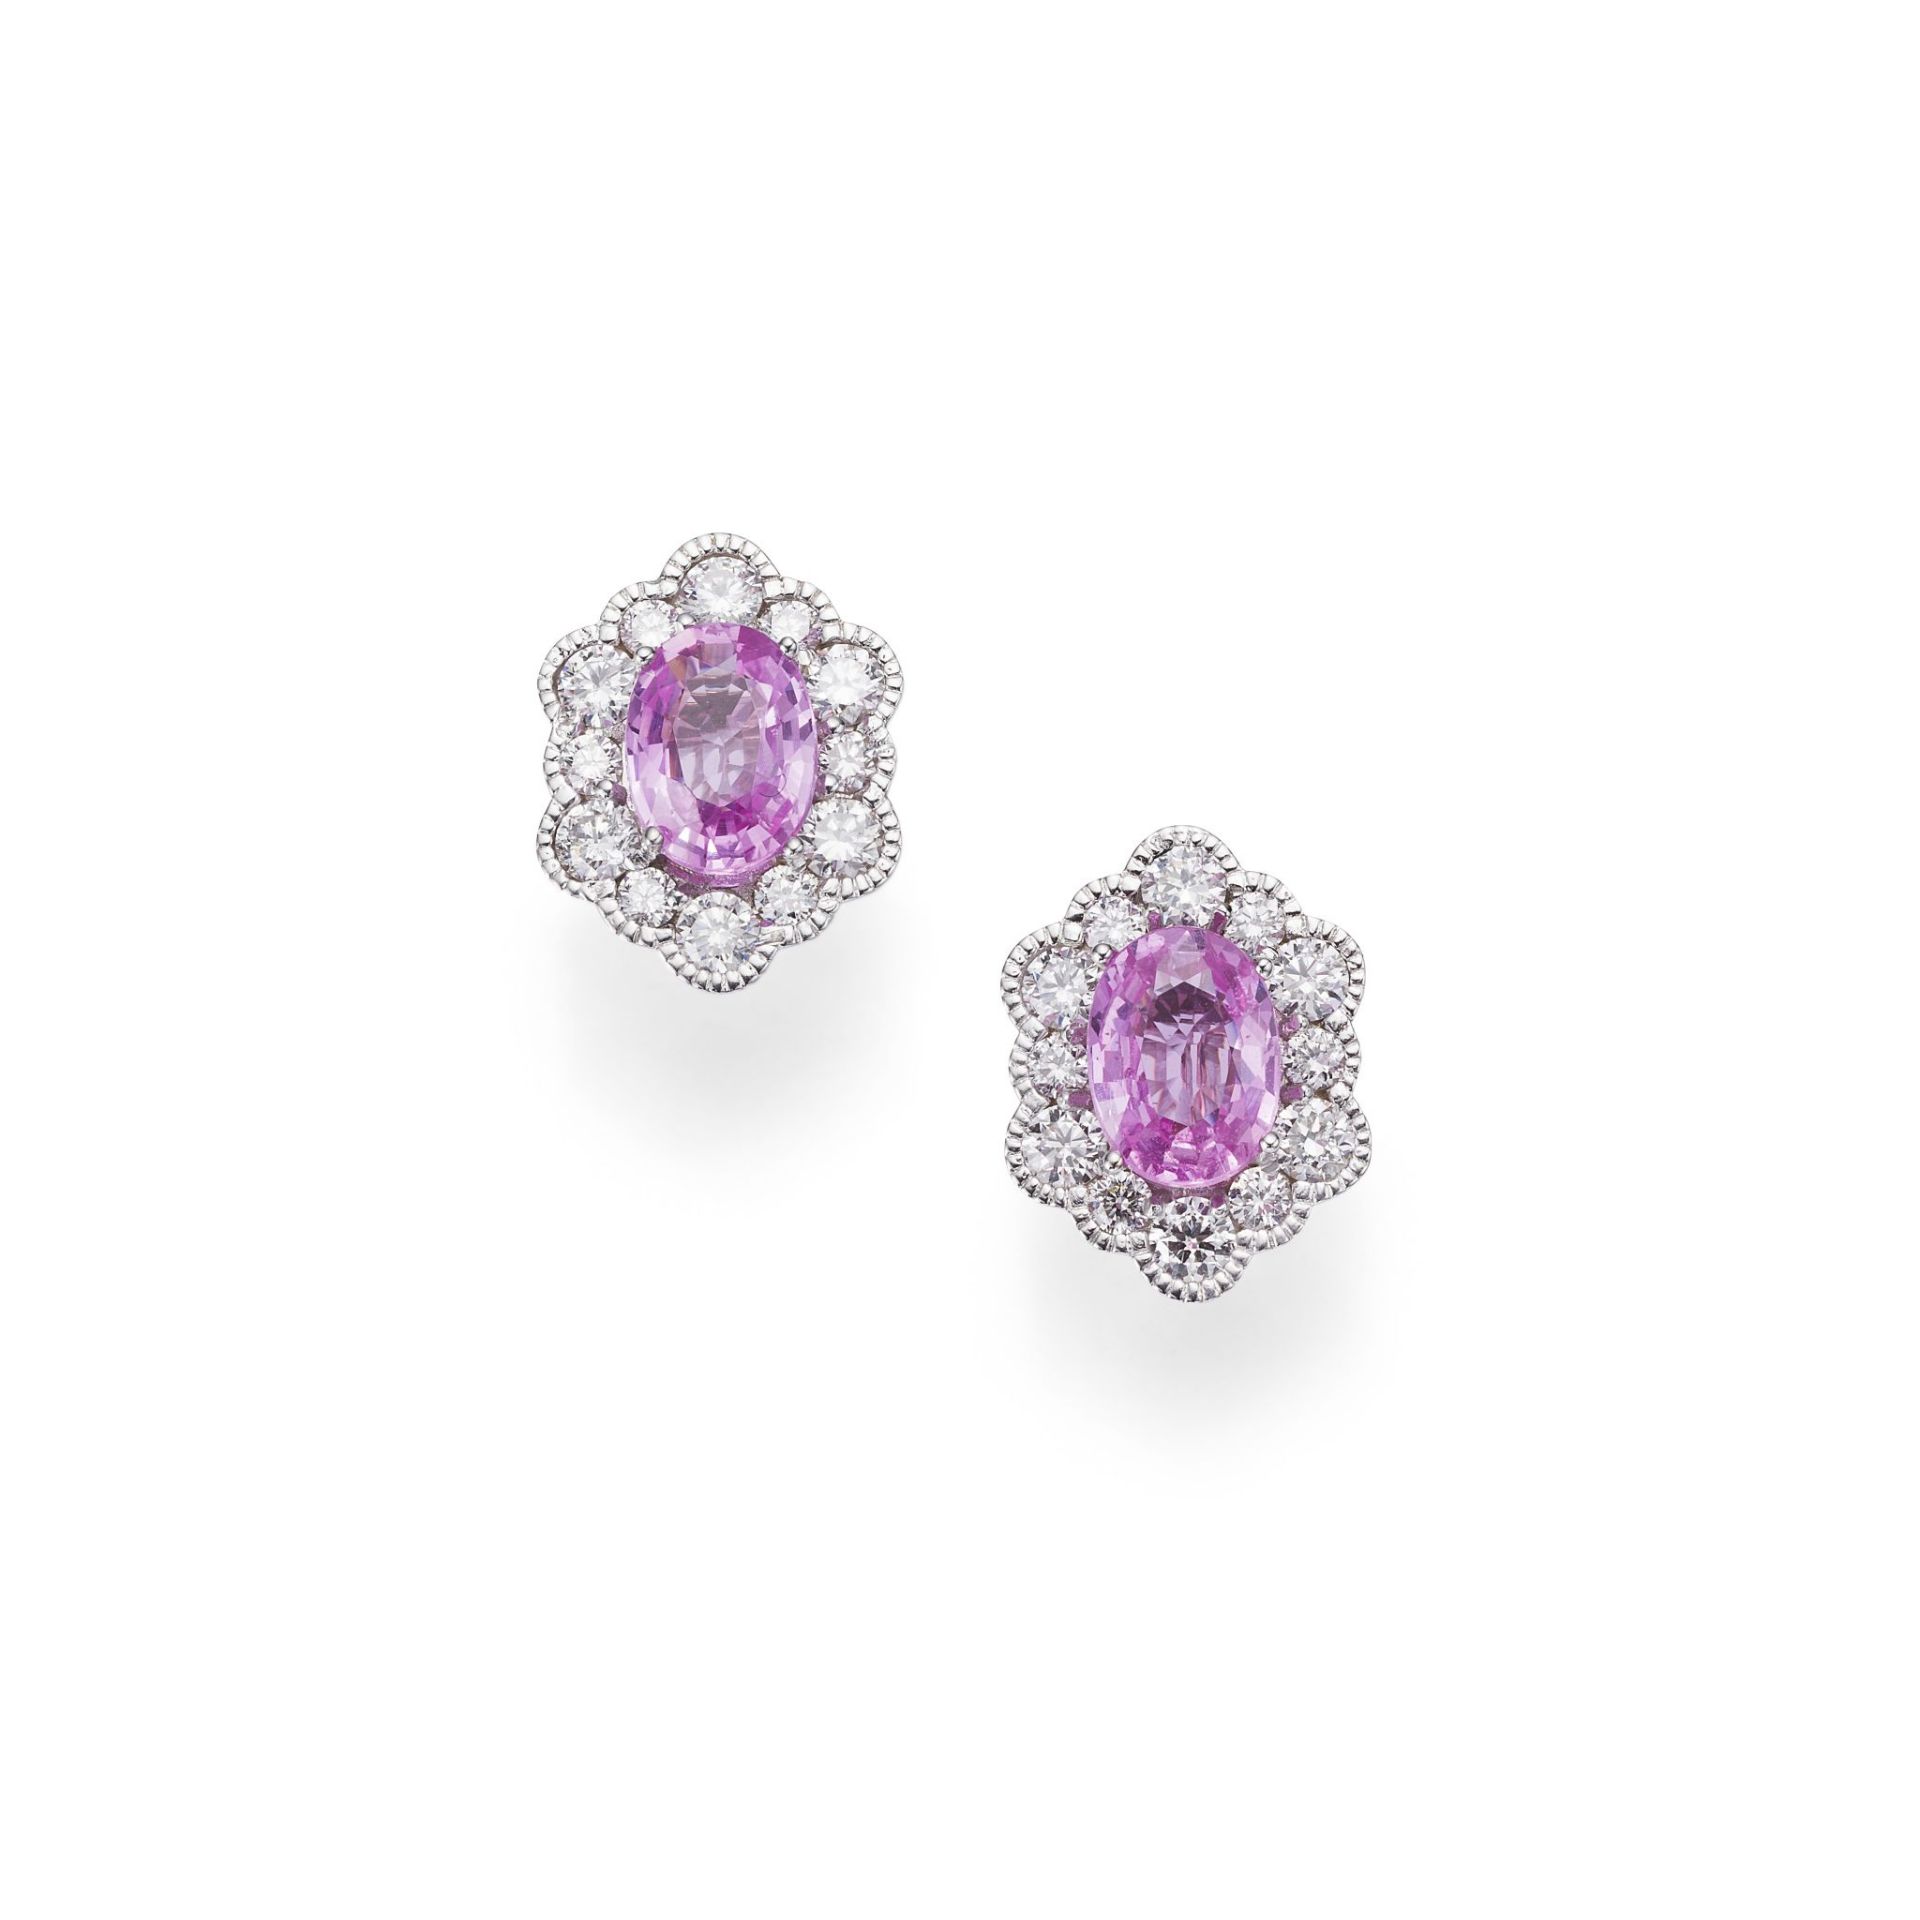 A PAIR OF PINK SAPPHIRE AND DIAMOND SET EARRINGS